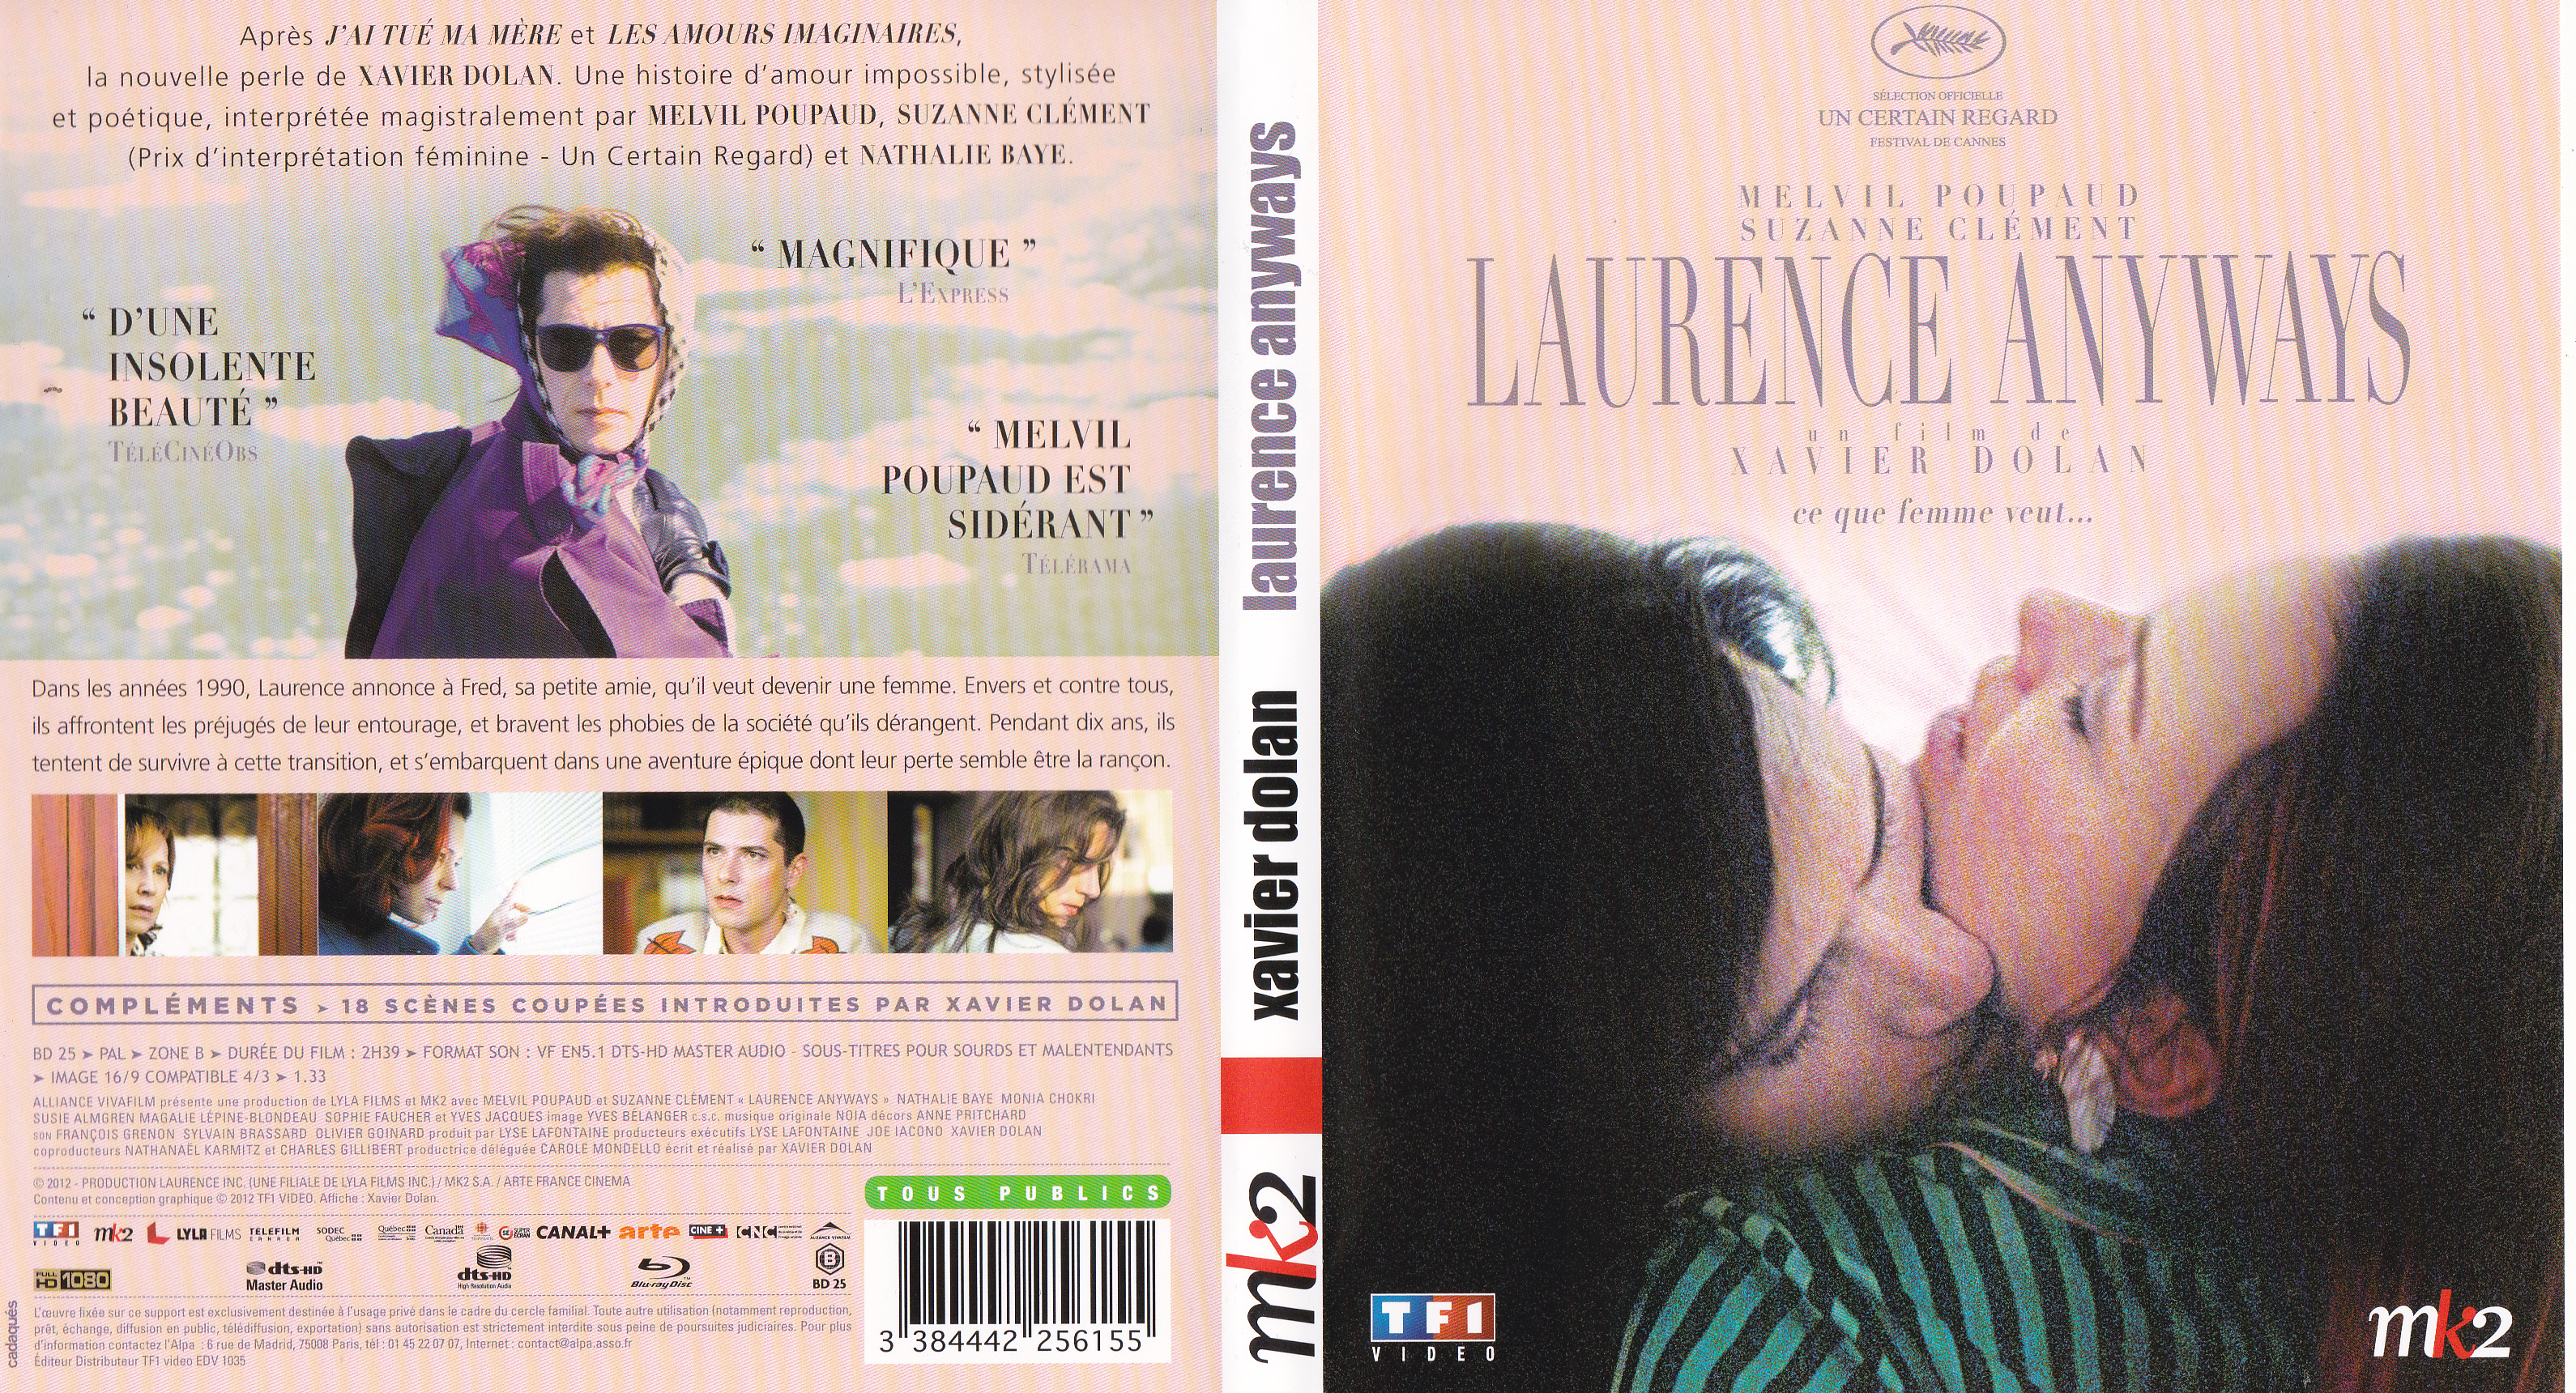 Jaquette DVD Laurence Anyways (BLU-RAY)